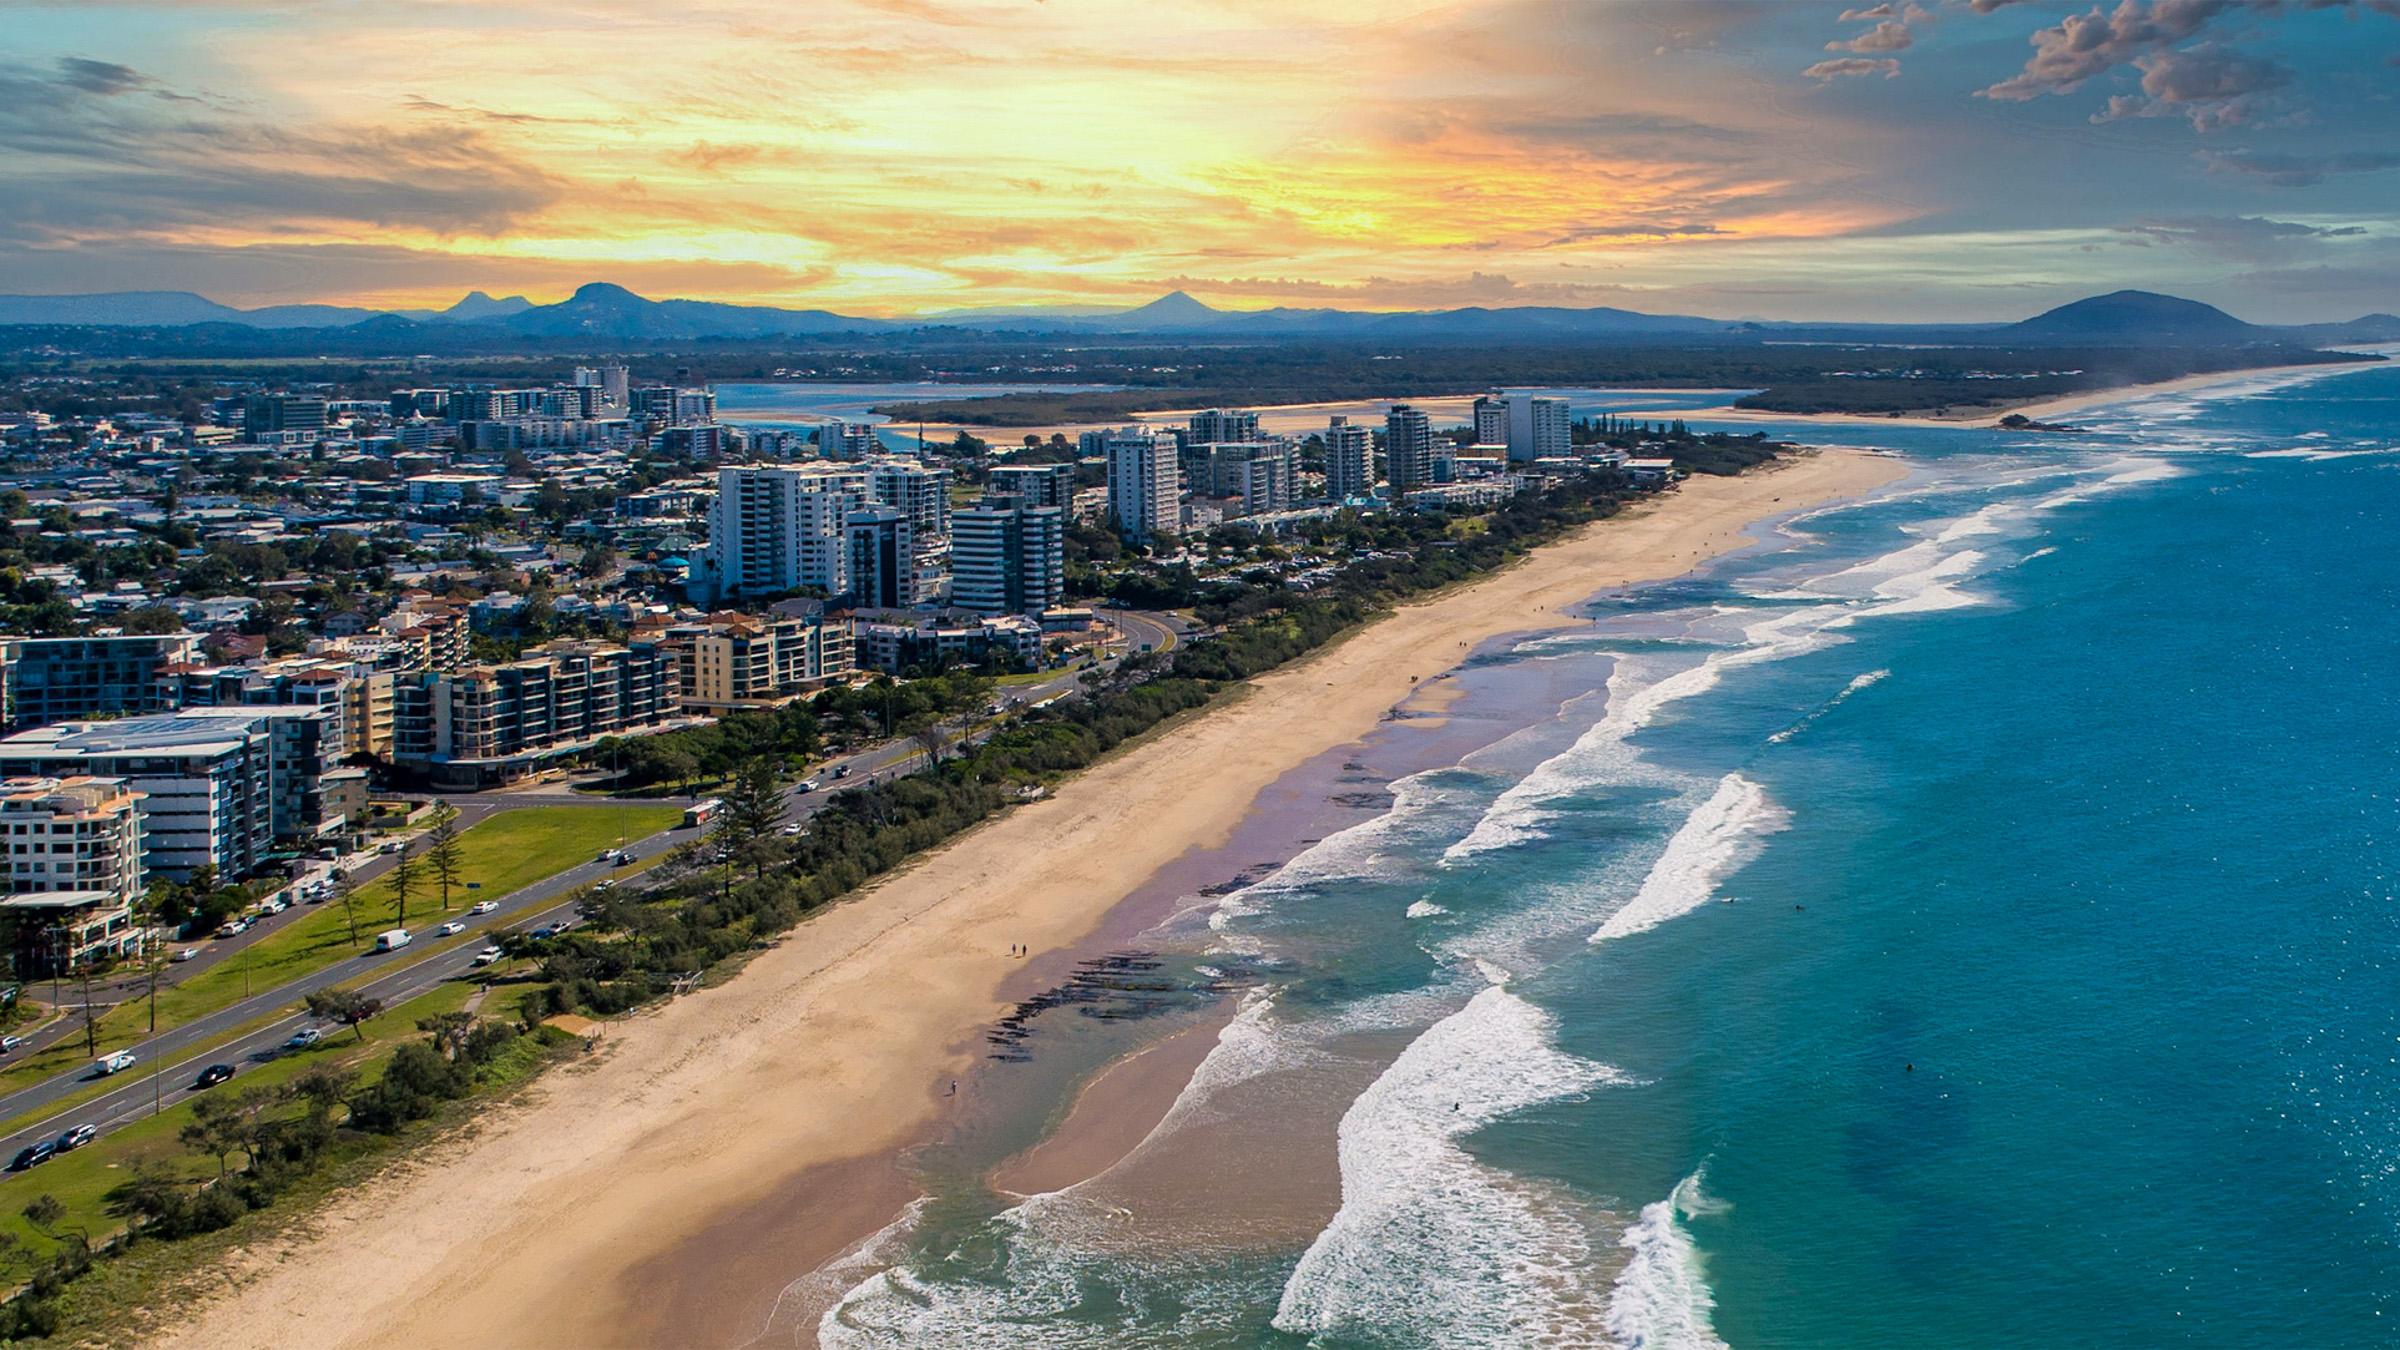 Aerial shot of Mooloolaba beach beachfront hotels during sunset with the Mooloolah River in background